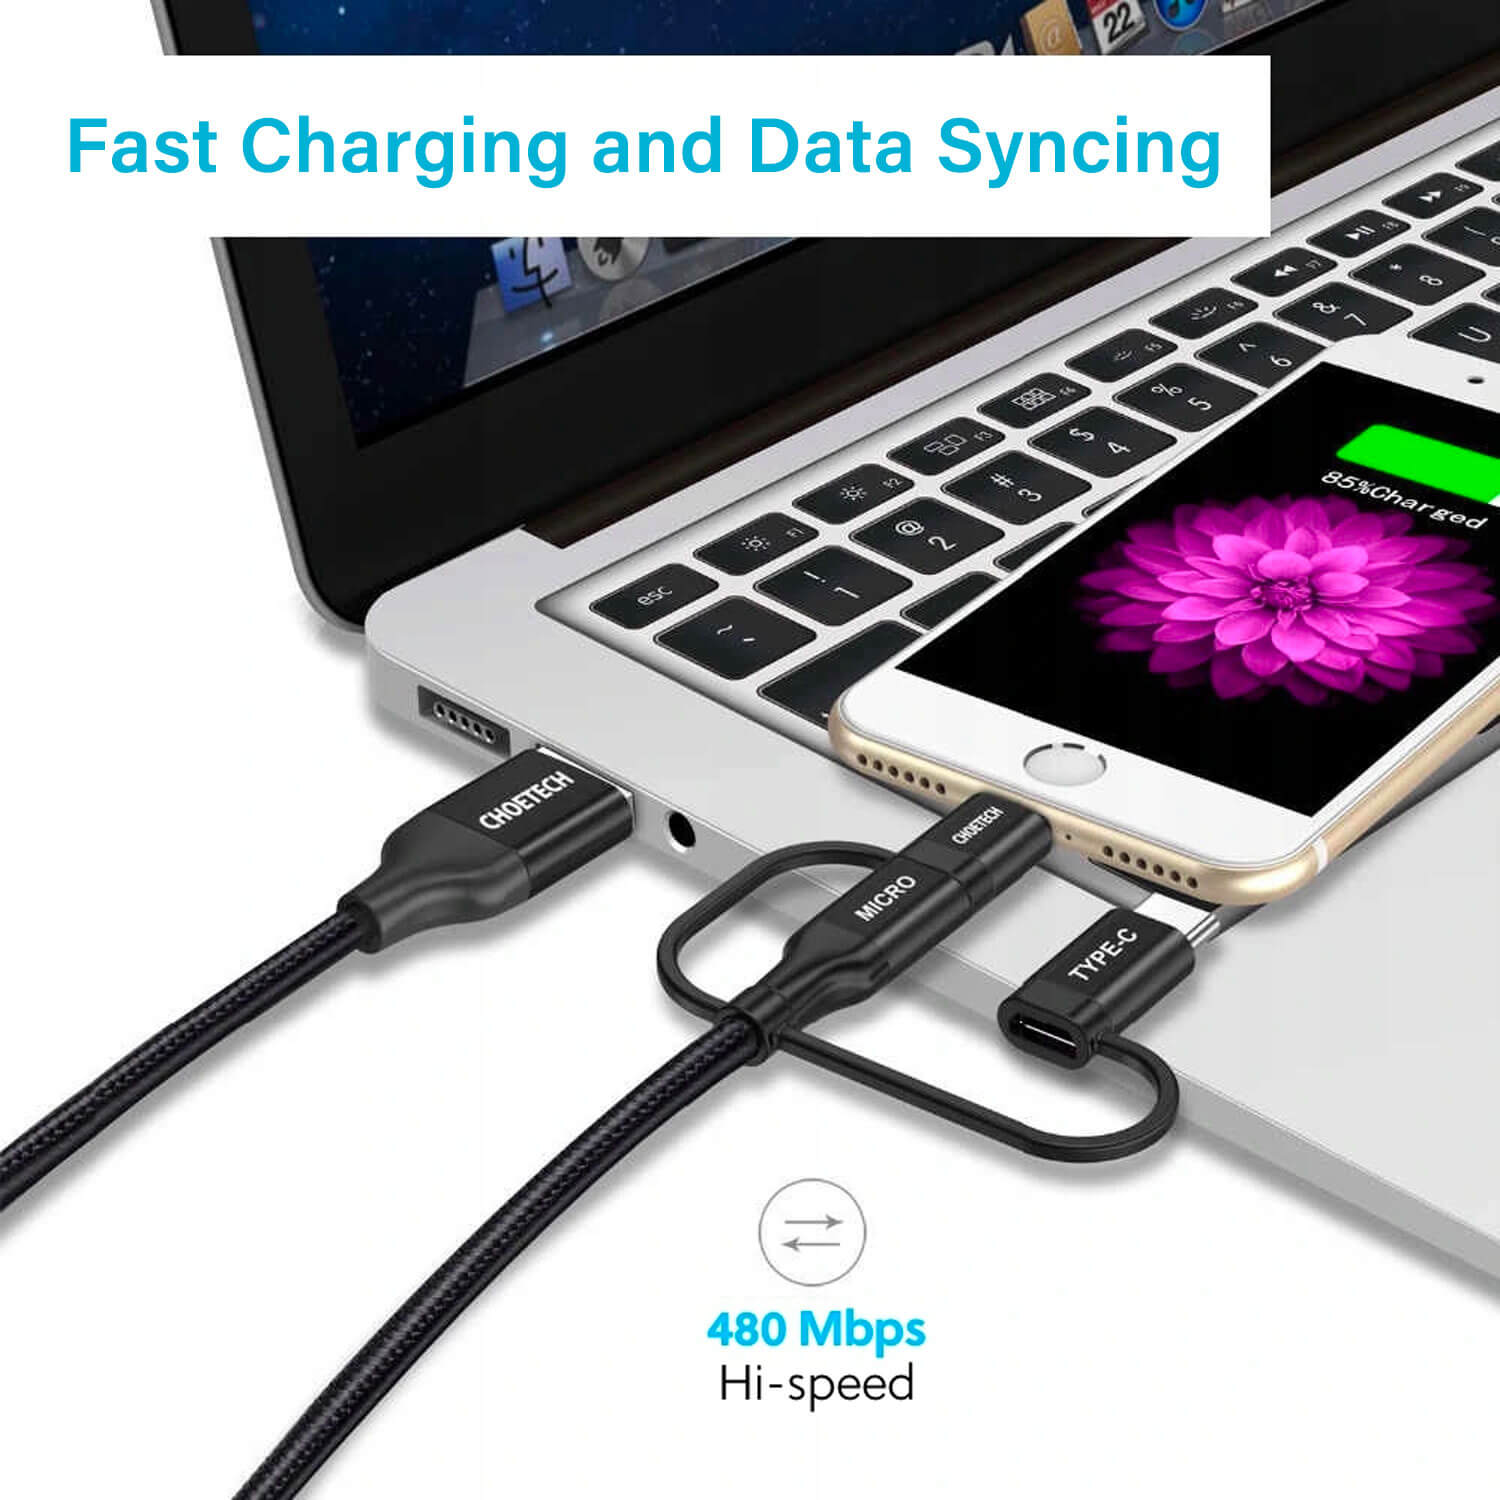 Choetech MFI Certified 3 in 1 Charging Cable Black